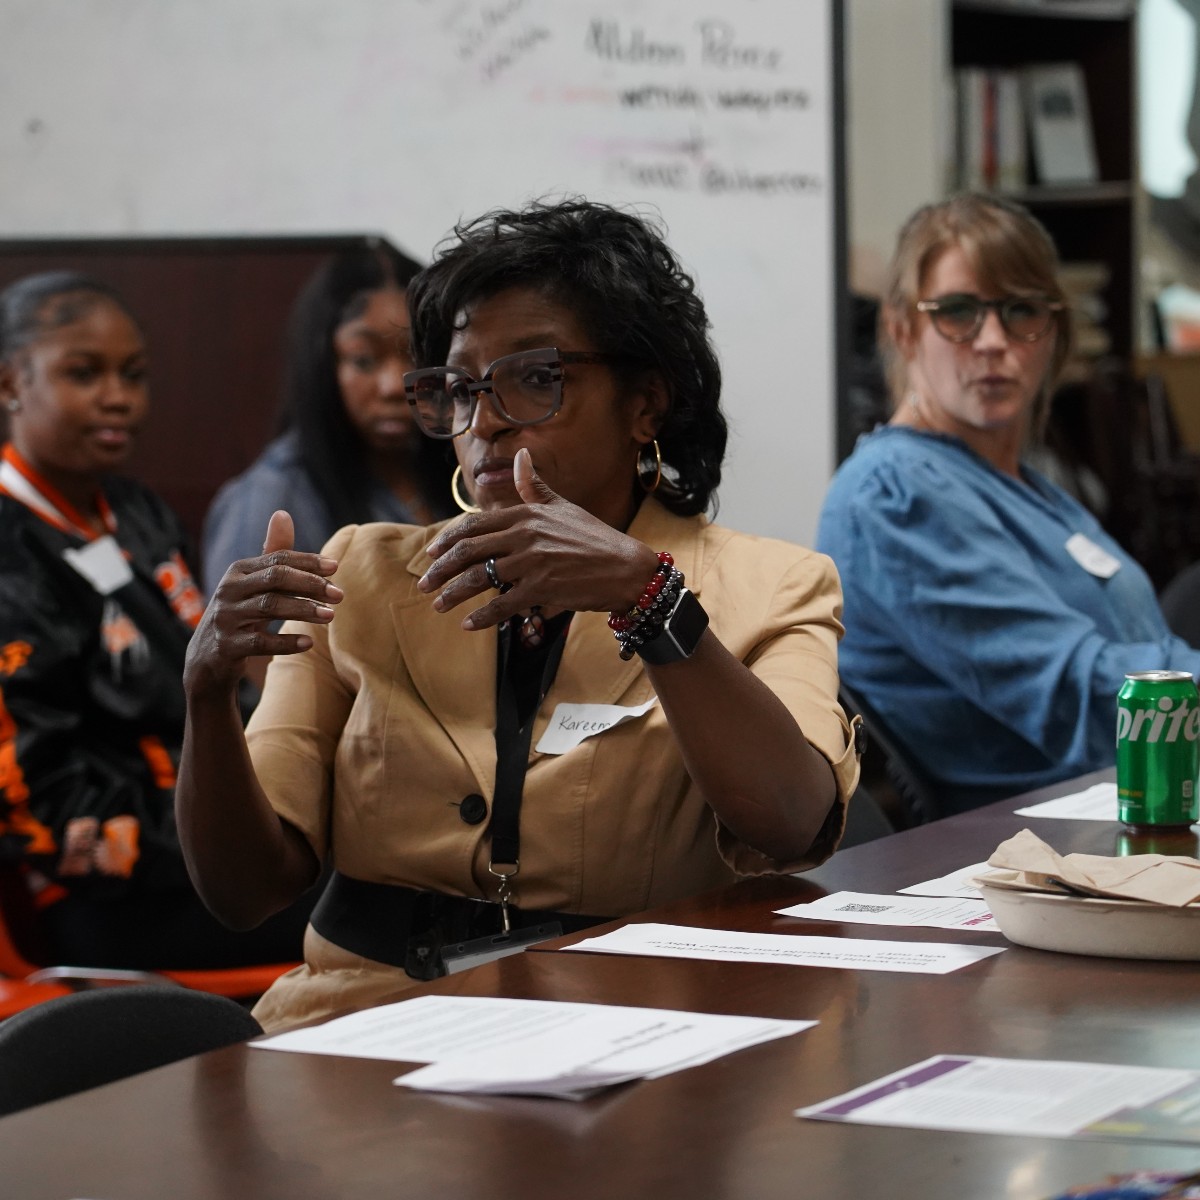 15 nonprofit leaders and 15 Withrow seniors came together to discuss dominant narratives affecting young people of color. Led by Pi’Son Brown and @learning_grove, the program 'My Mistake' fostered open dialogue, revealing deep insights. More at: brnw.ch/21wK6EJ